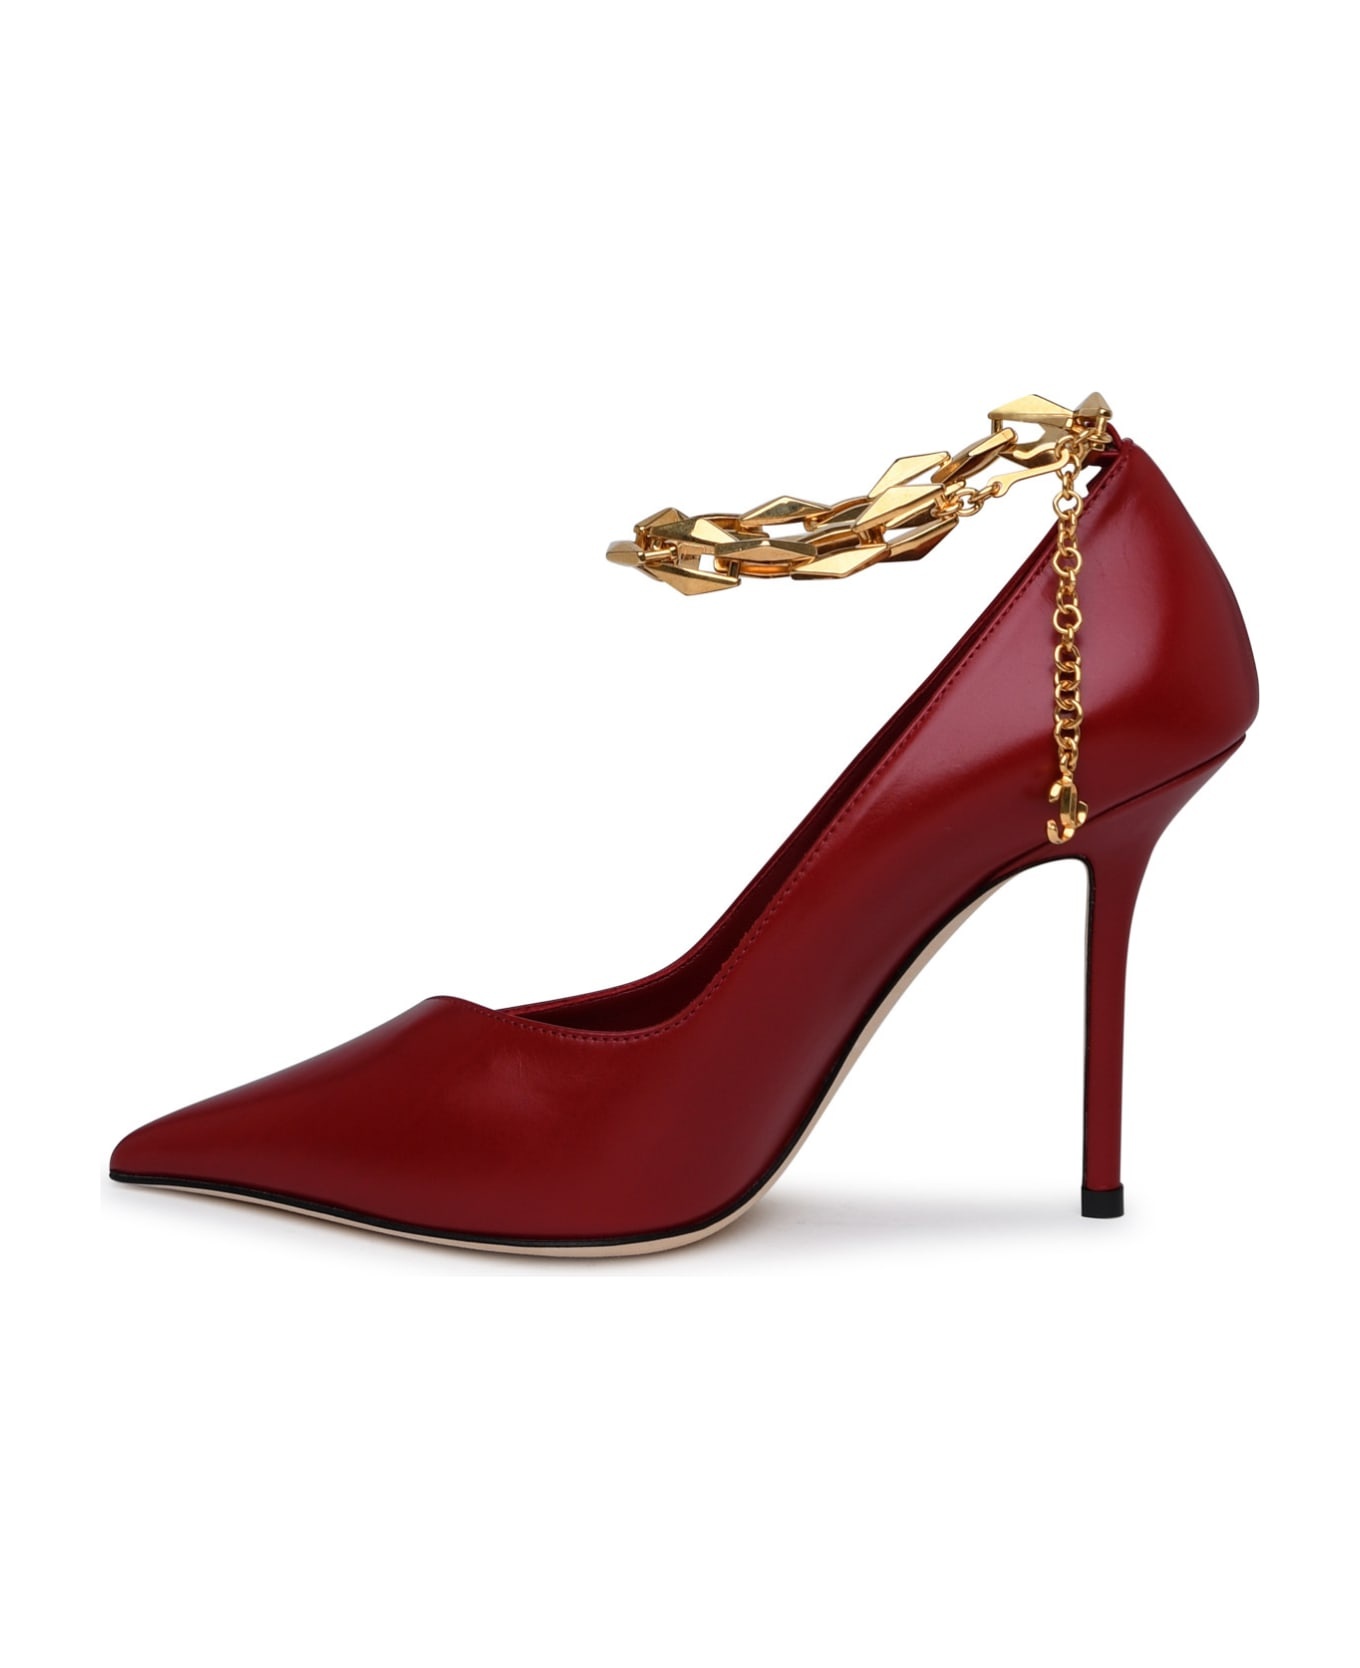 Diamond Pumps In Red Leather - 3